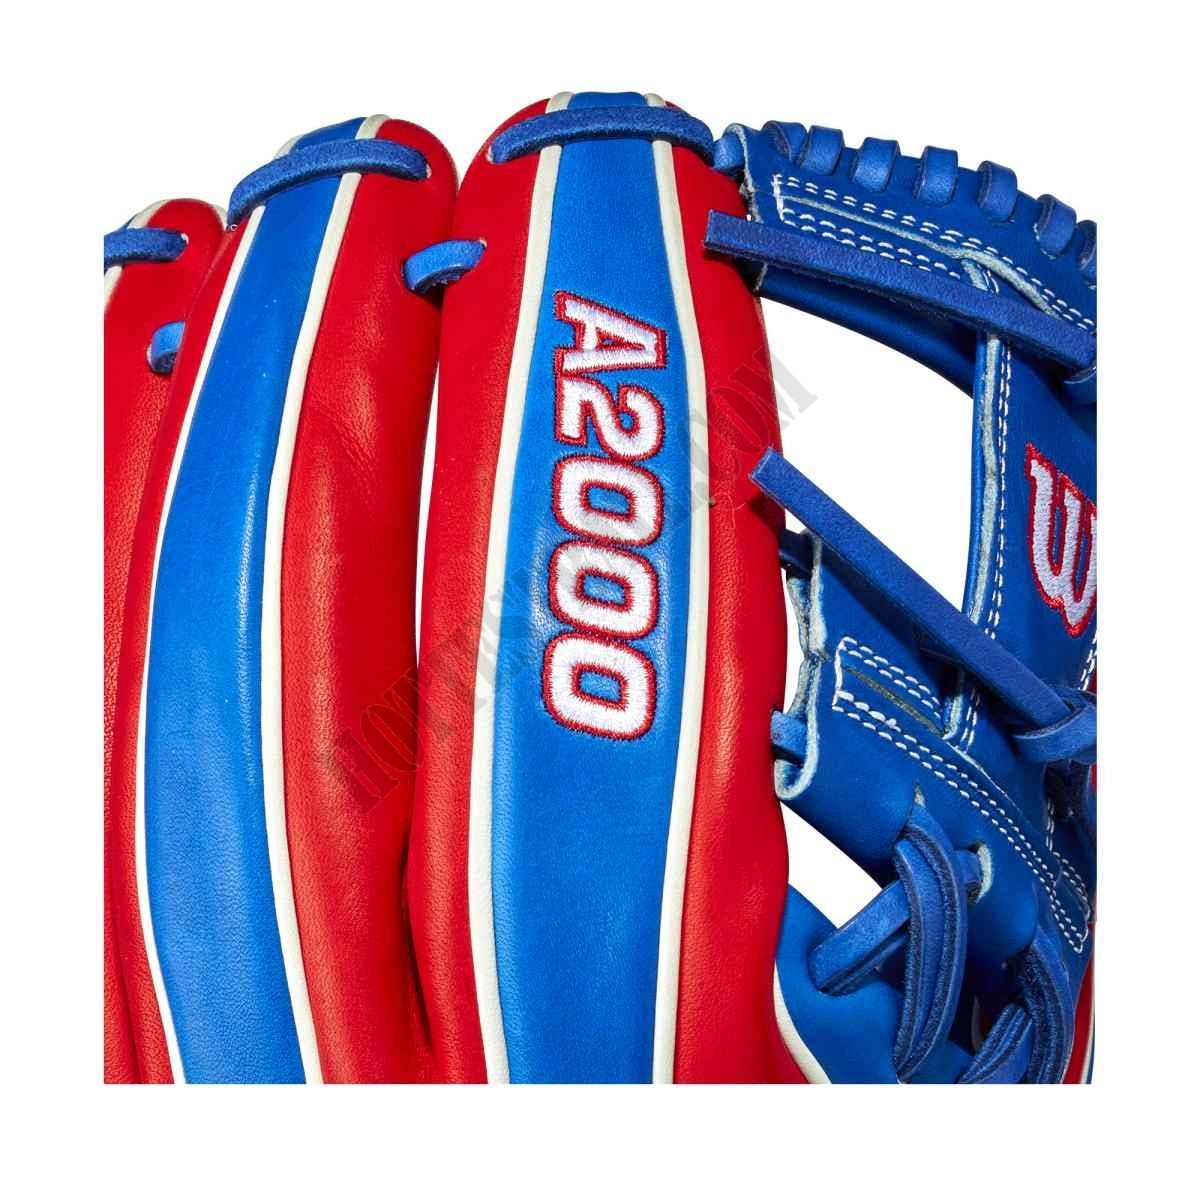 2021 A2000 1786 Dominican Republic 11.5" Infield Baseball Glove - Limited Edition ● Wilson Promotions - -6